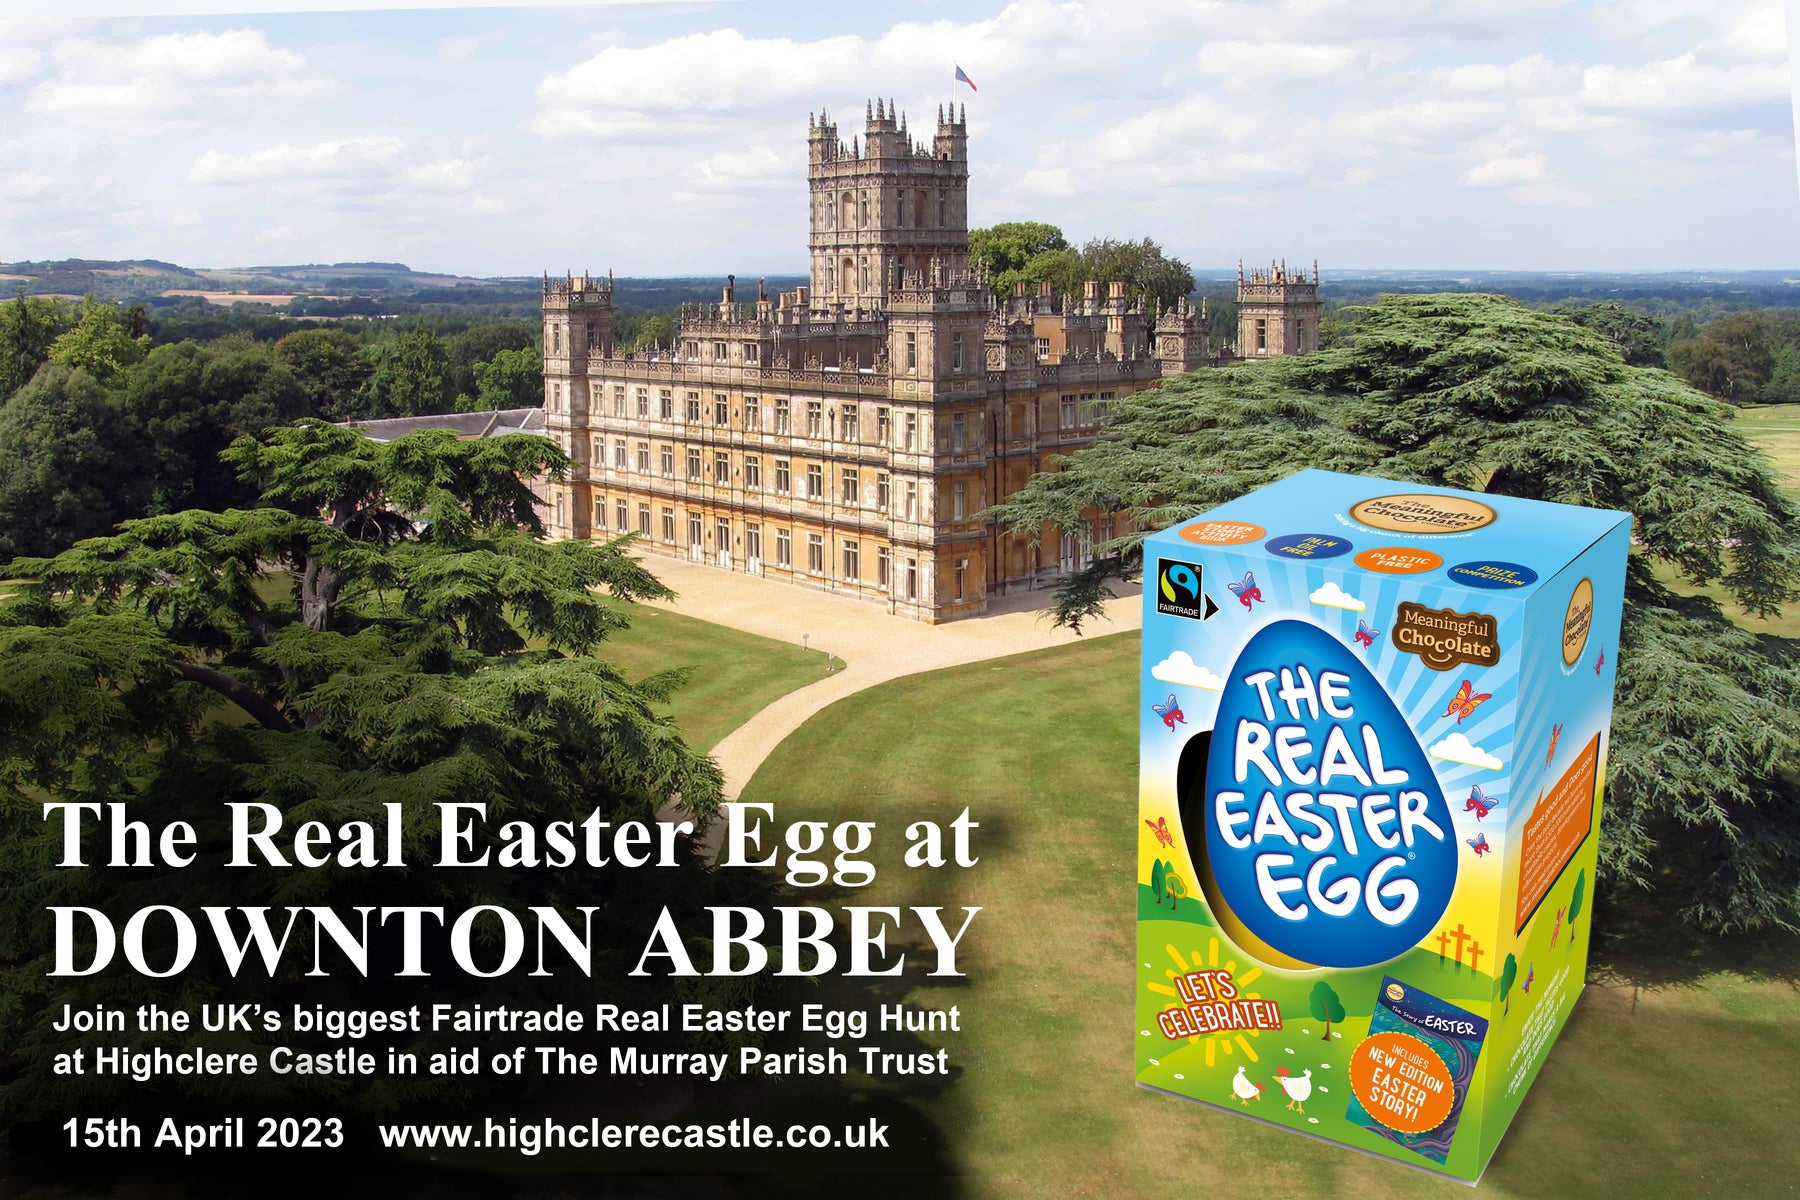 Help us provide eggs for the 'Downton Abbey' Easter Egg hunt through a mission donation